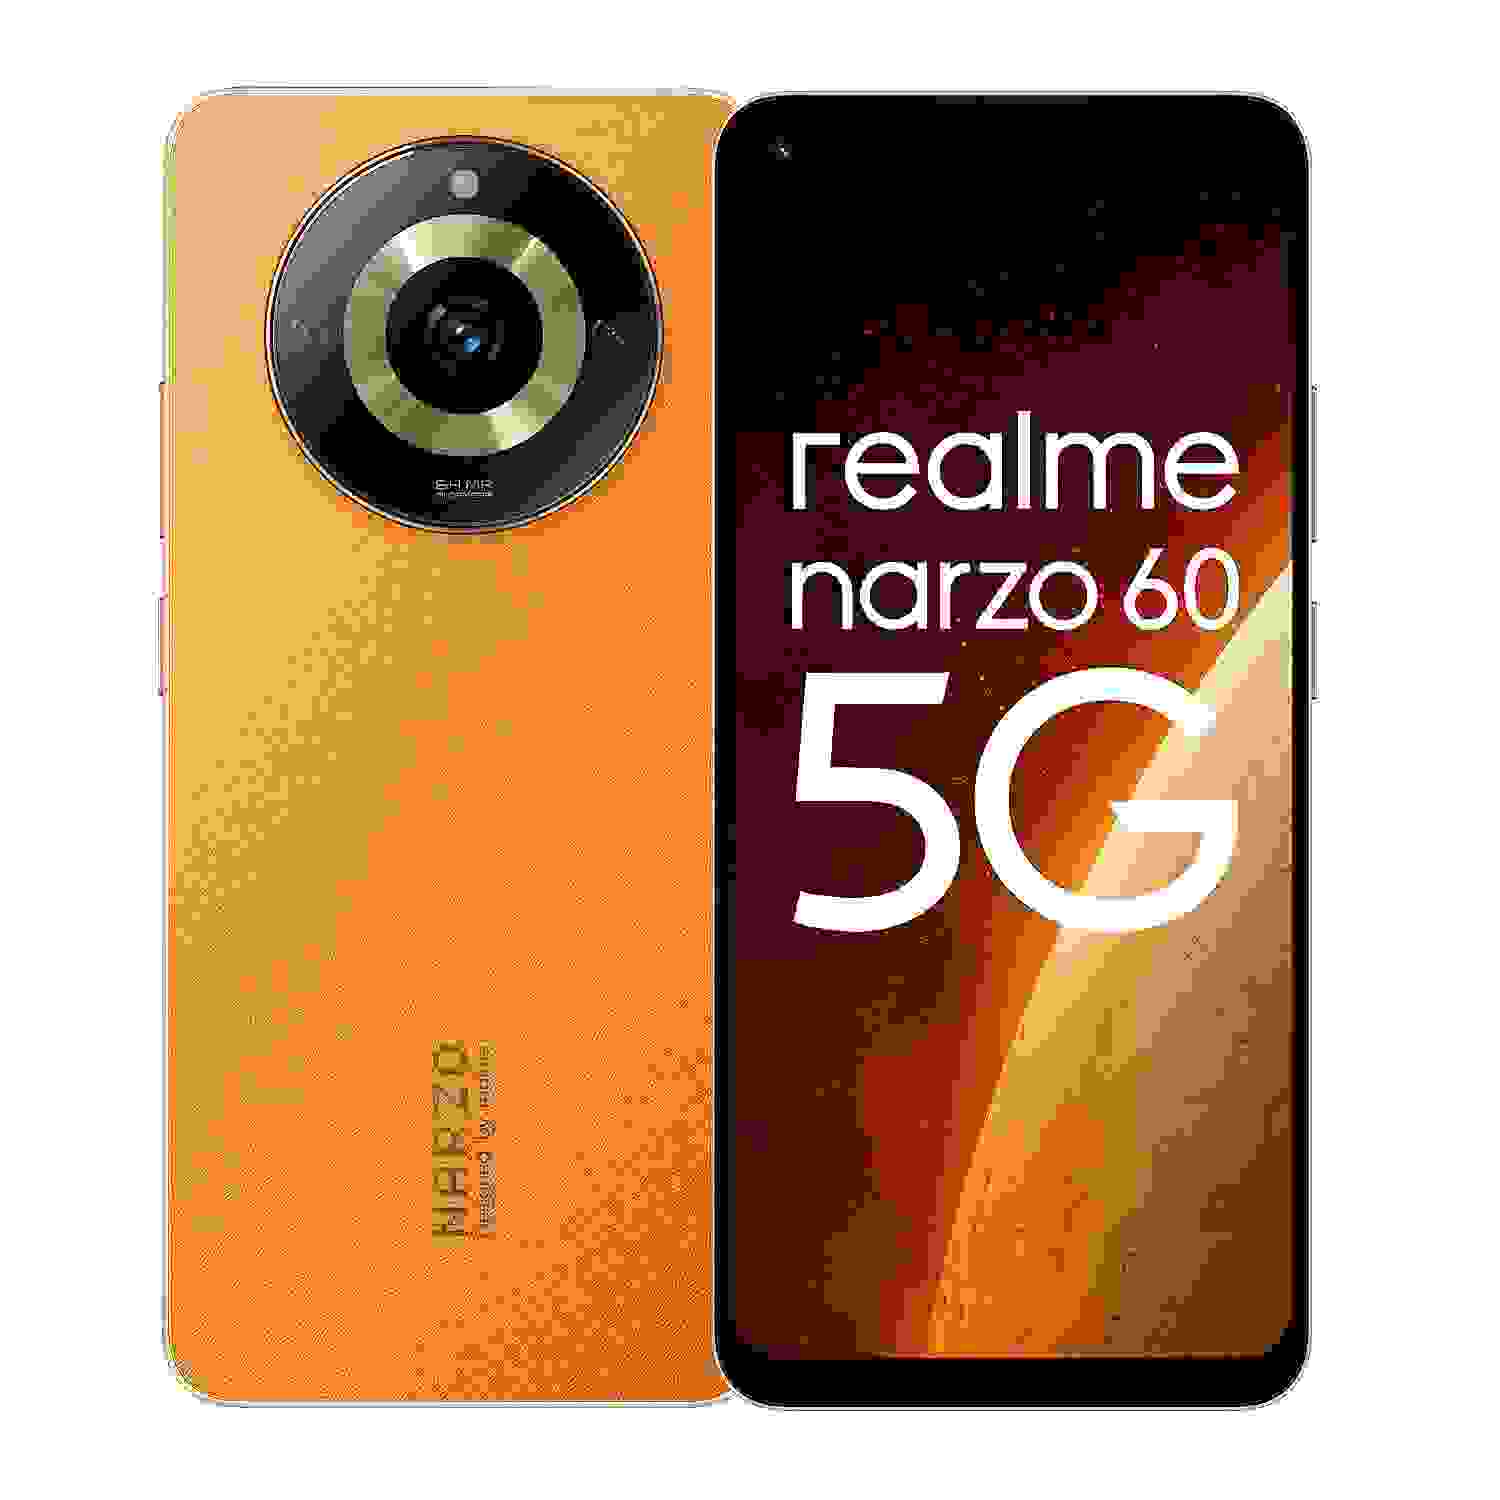 realme narzo 60 5G price and Specifications